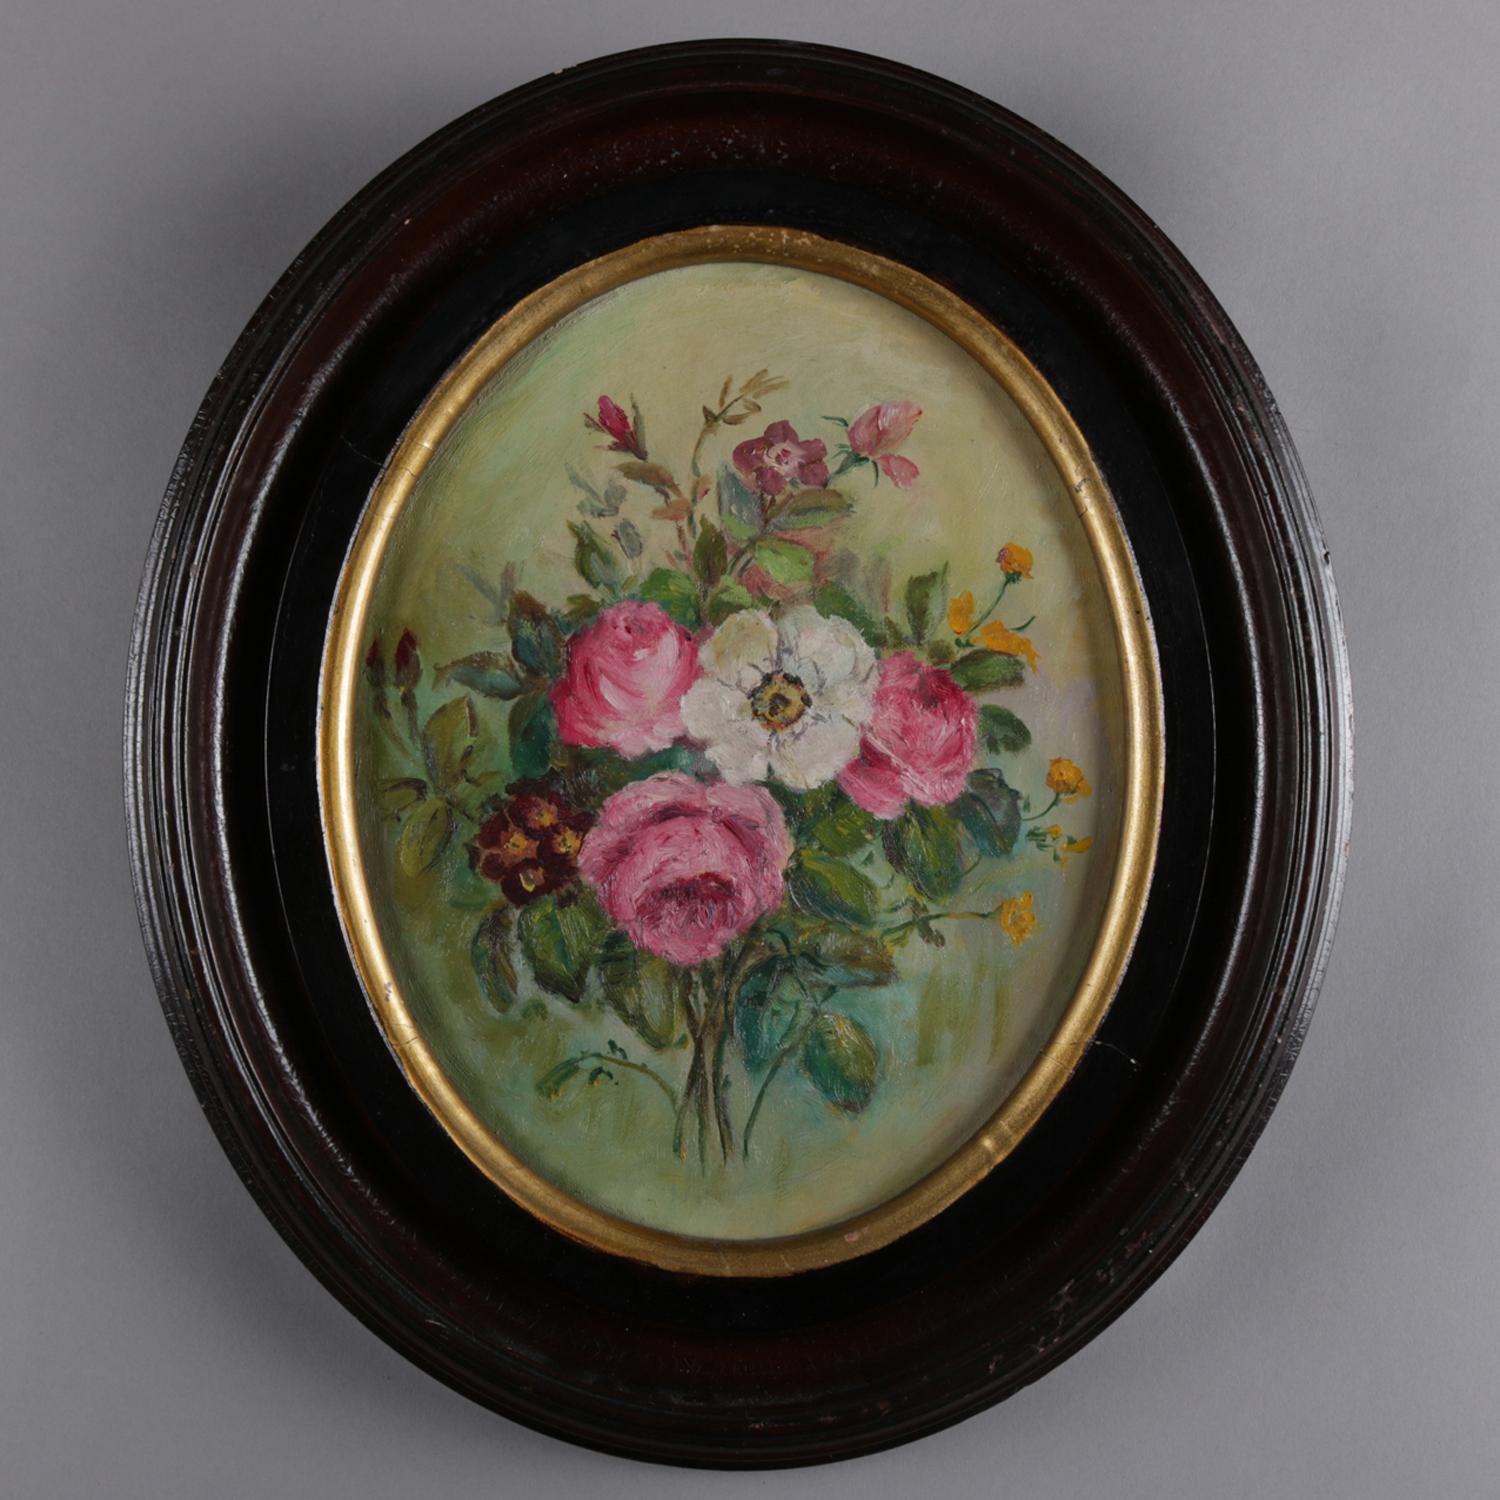 An antique still life oil on canvas over artist board painting depicts flowers in bouquet, seated in oval deep walnut frame, circa 1890

***DELIVERY NOTICE – Due to COVID-19 we are employing NO-CONTACT PRACTICES in the transfer of purchased items. 